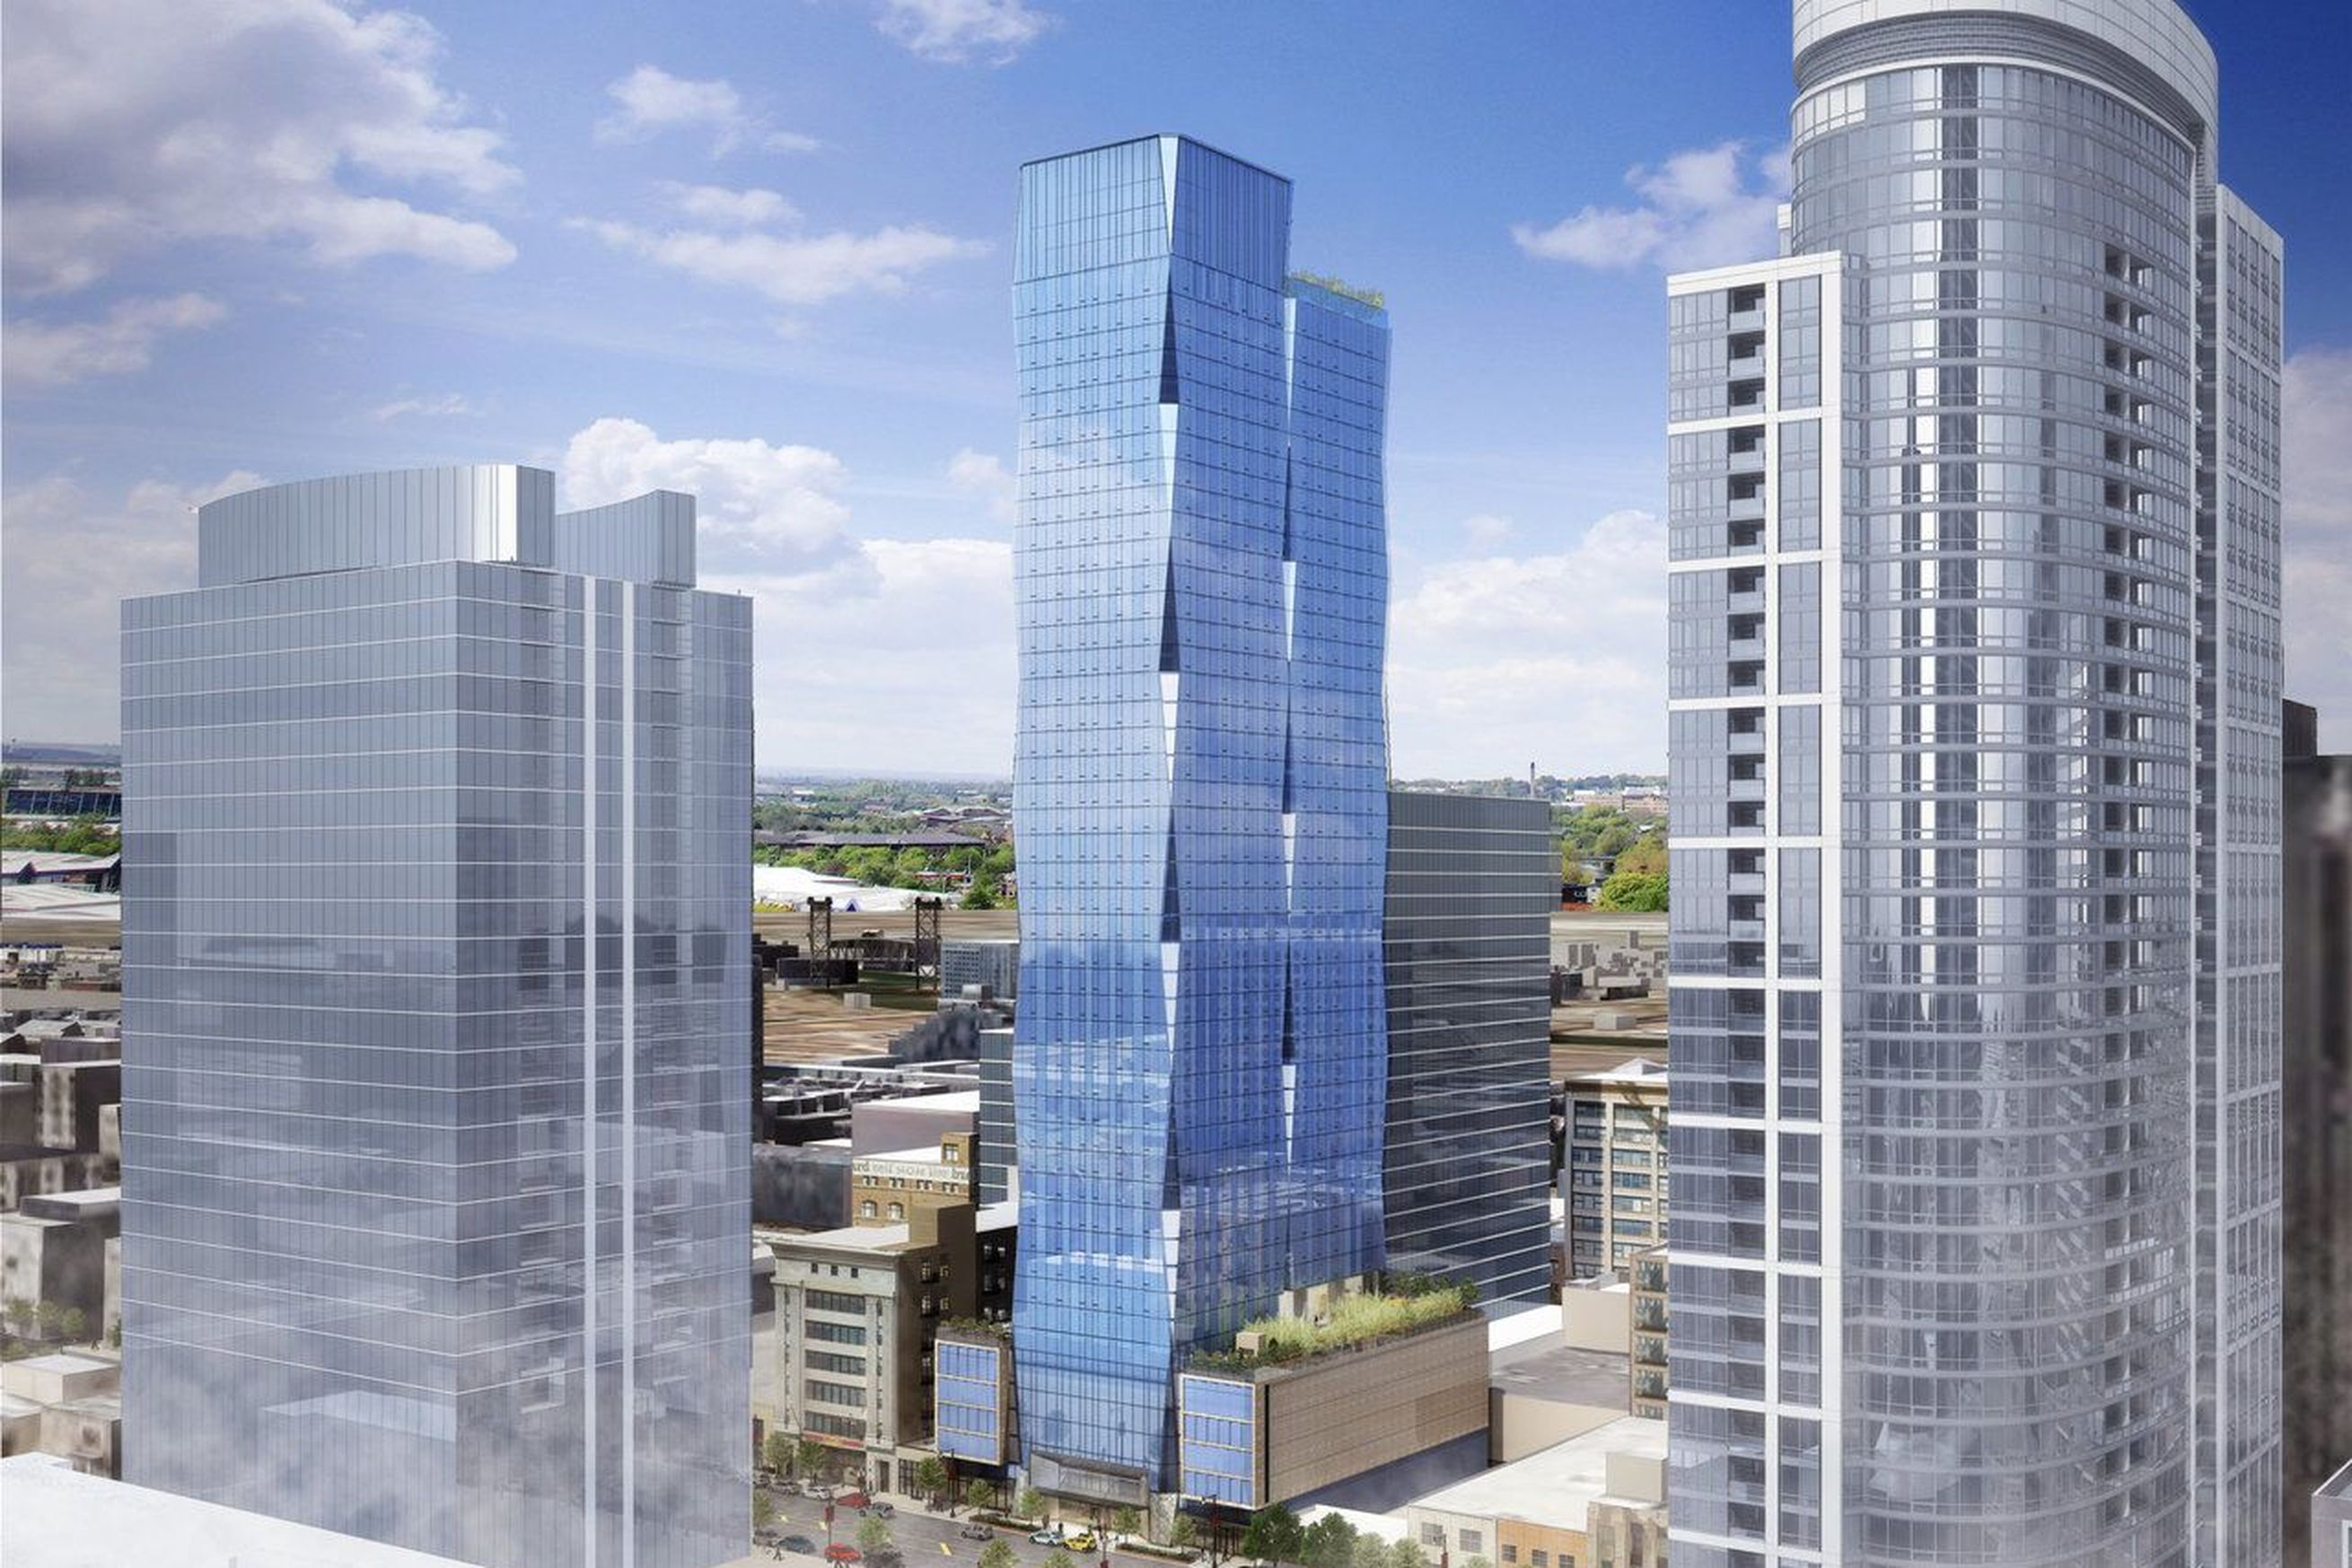 Work to start on 47-story South Loop apartment tower | South loop ...